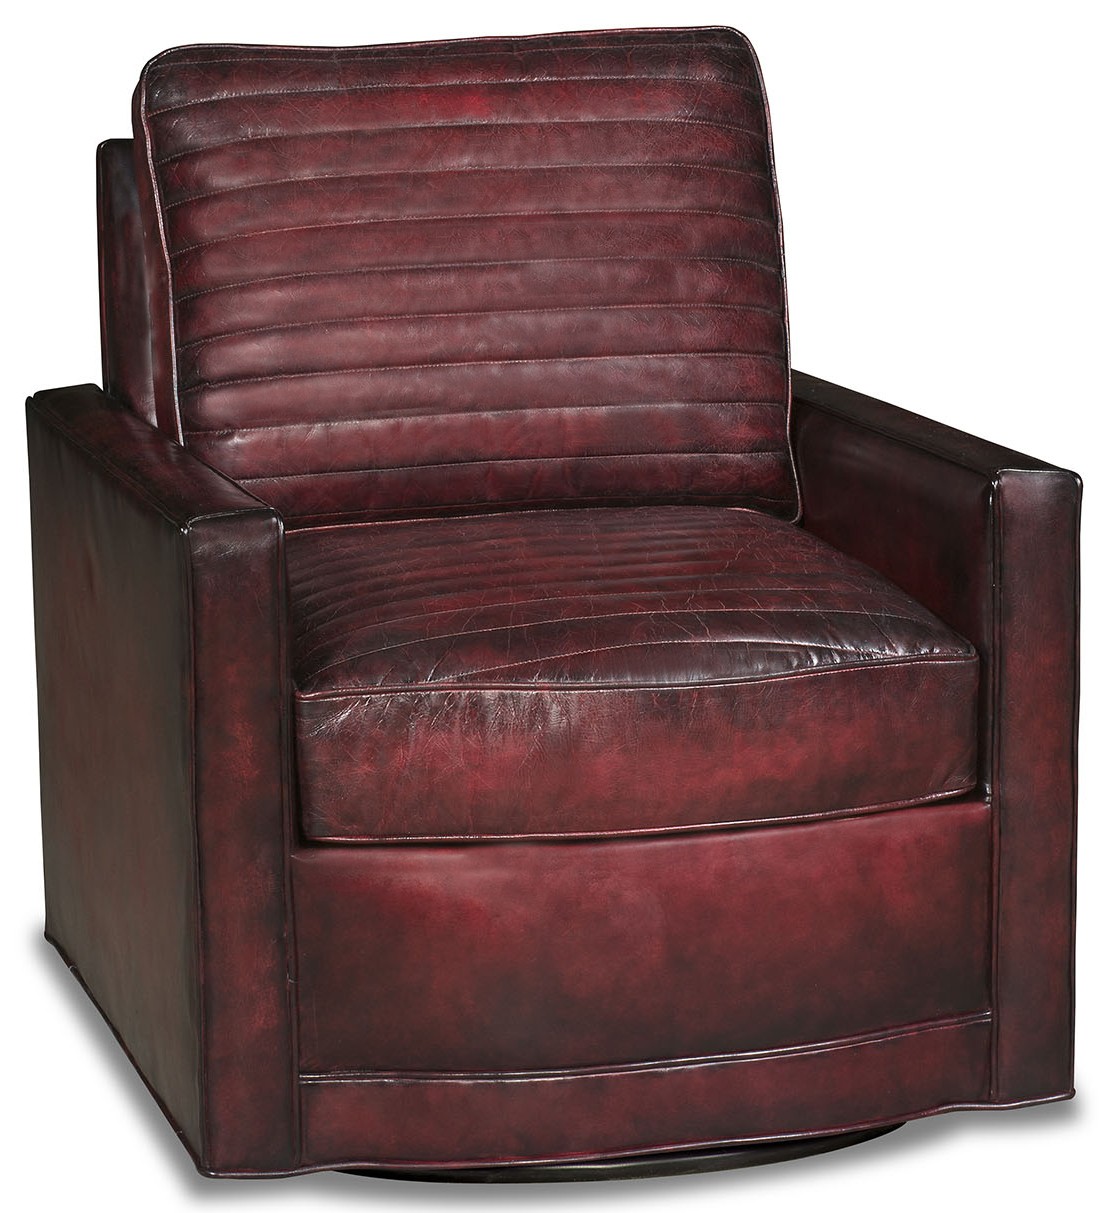 MOTION SEATING - Recliners, Swivels, Rockers High style leather swivel accent chair